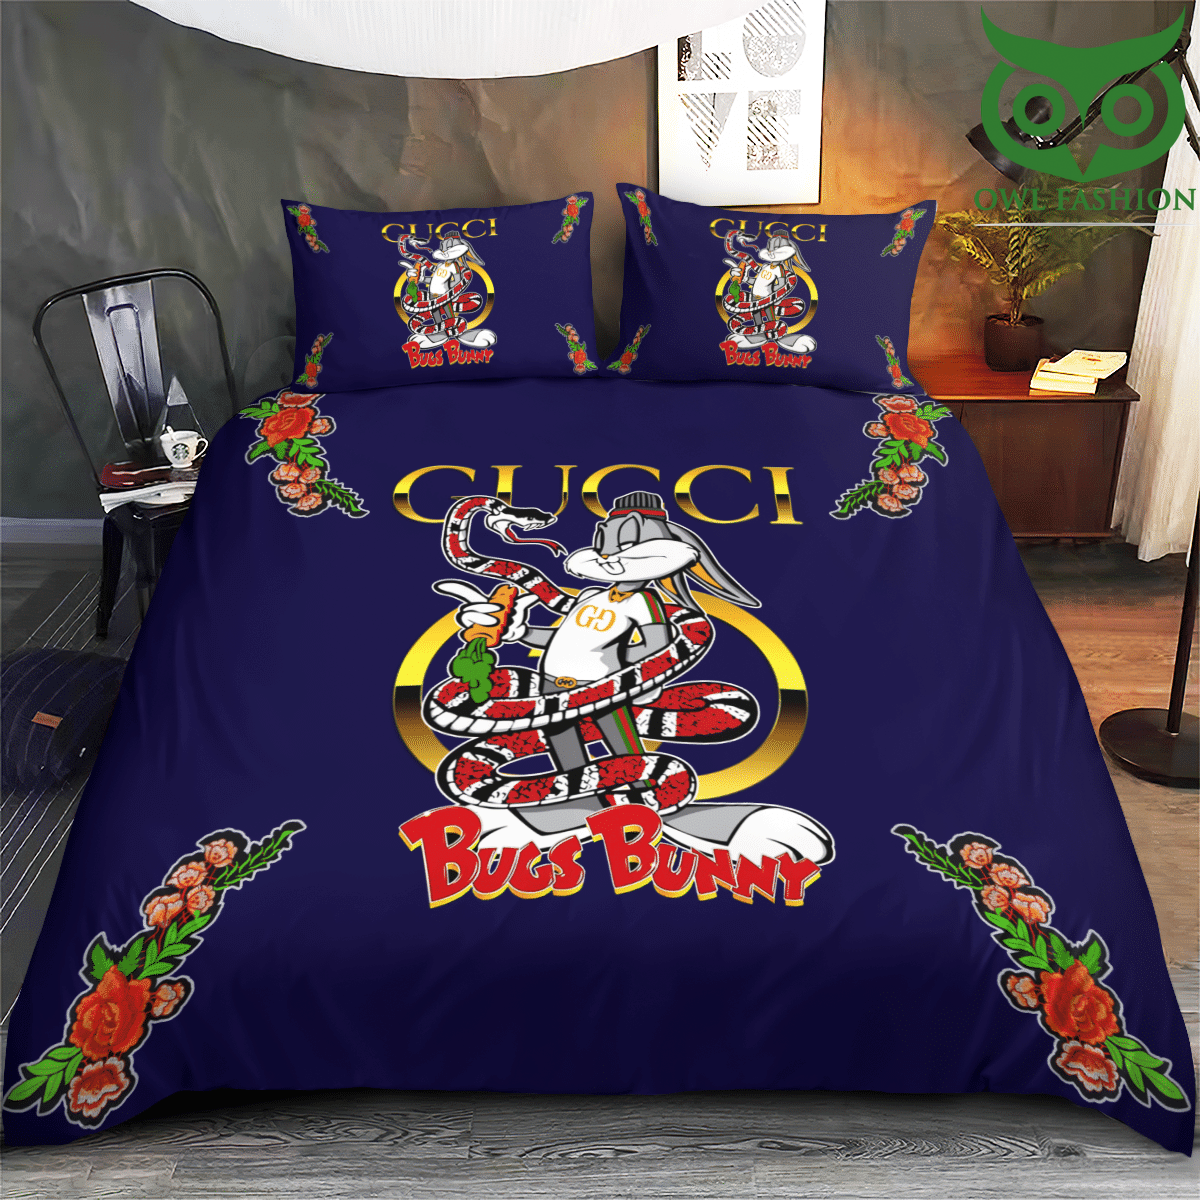 116 Gucci Bugs Bunny red rose blue bedding set